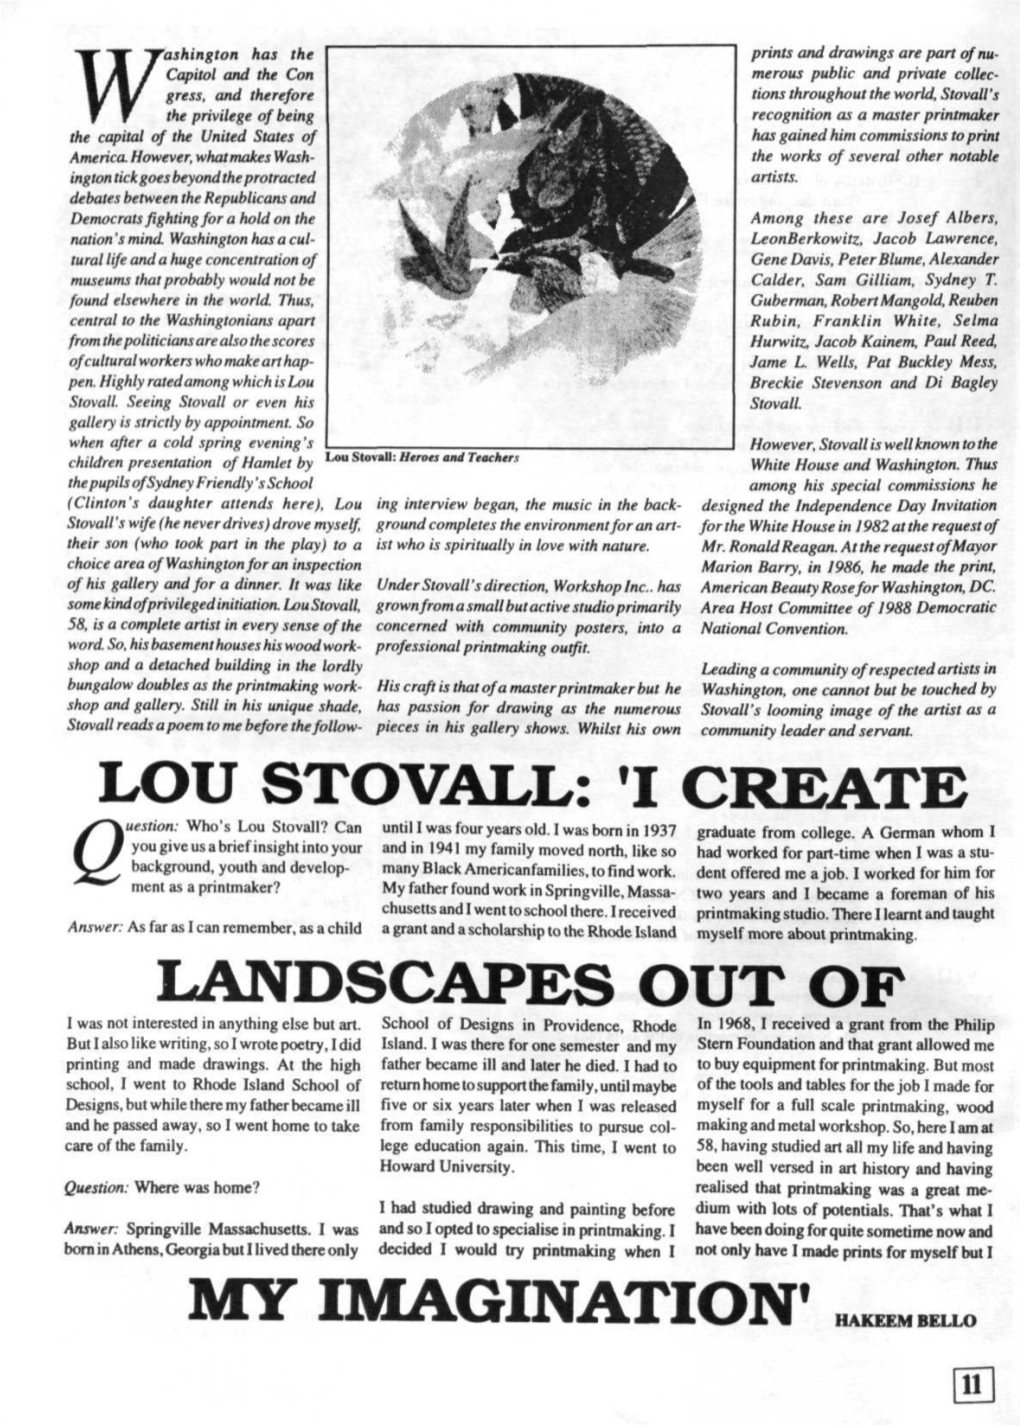 Lou Stovall: "I Create Landscapes out of My